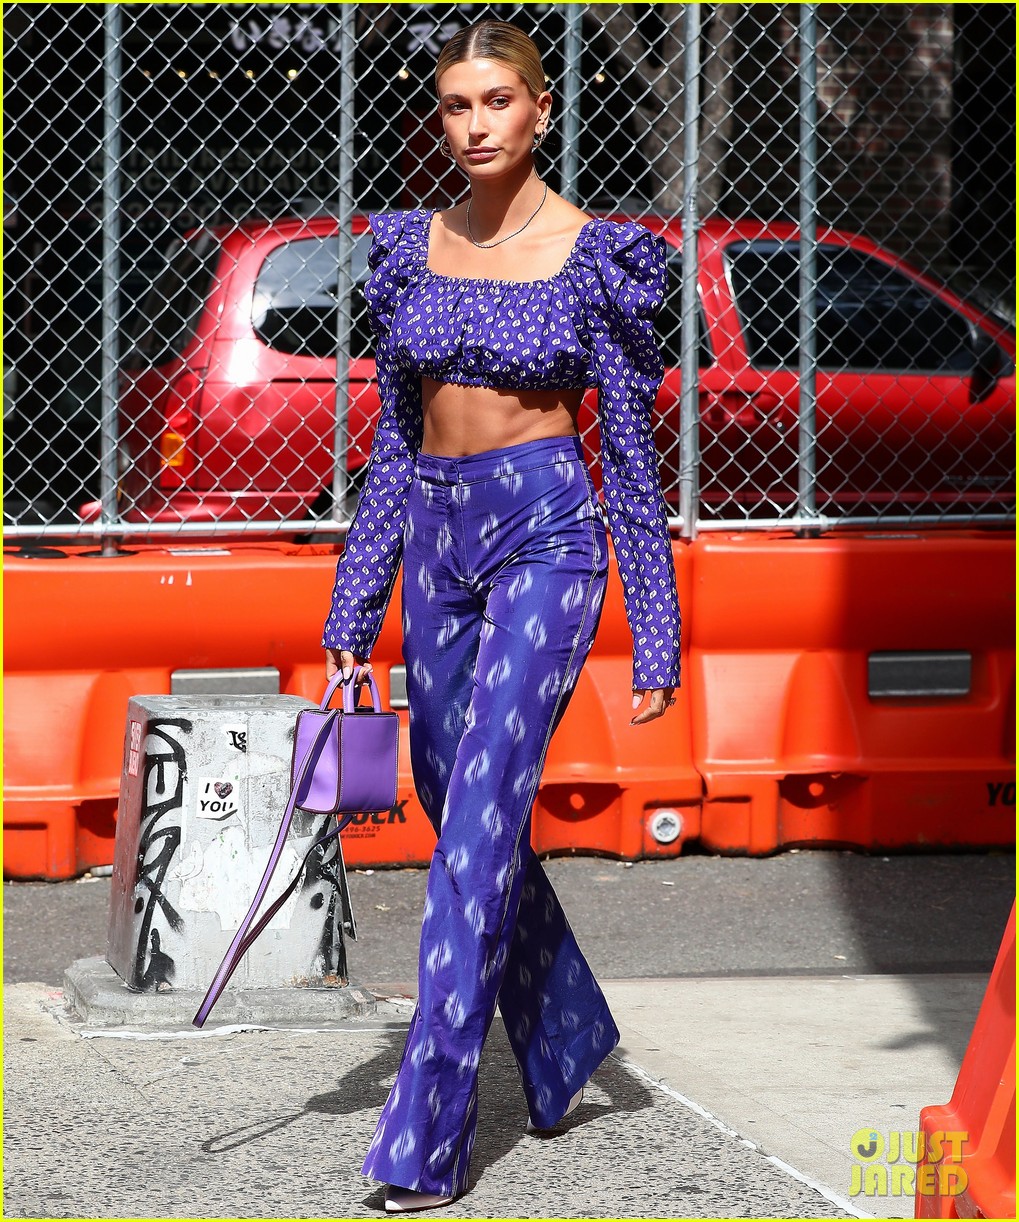 Hailey Bieber Shows Off Her Abs In Bright Blue Outfit | Photo 1258359 ...